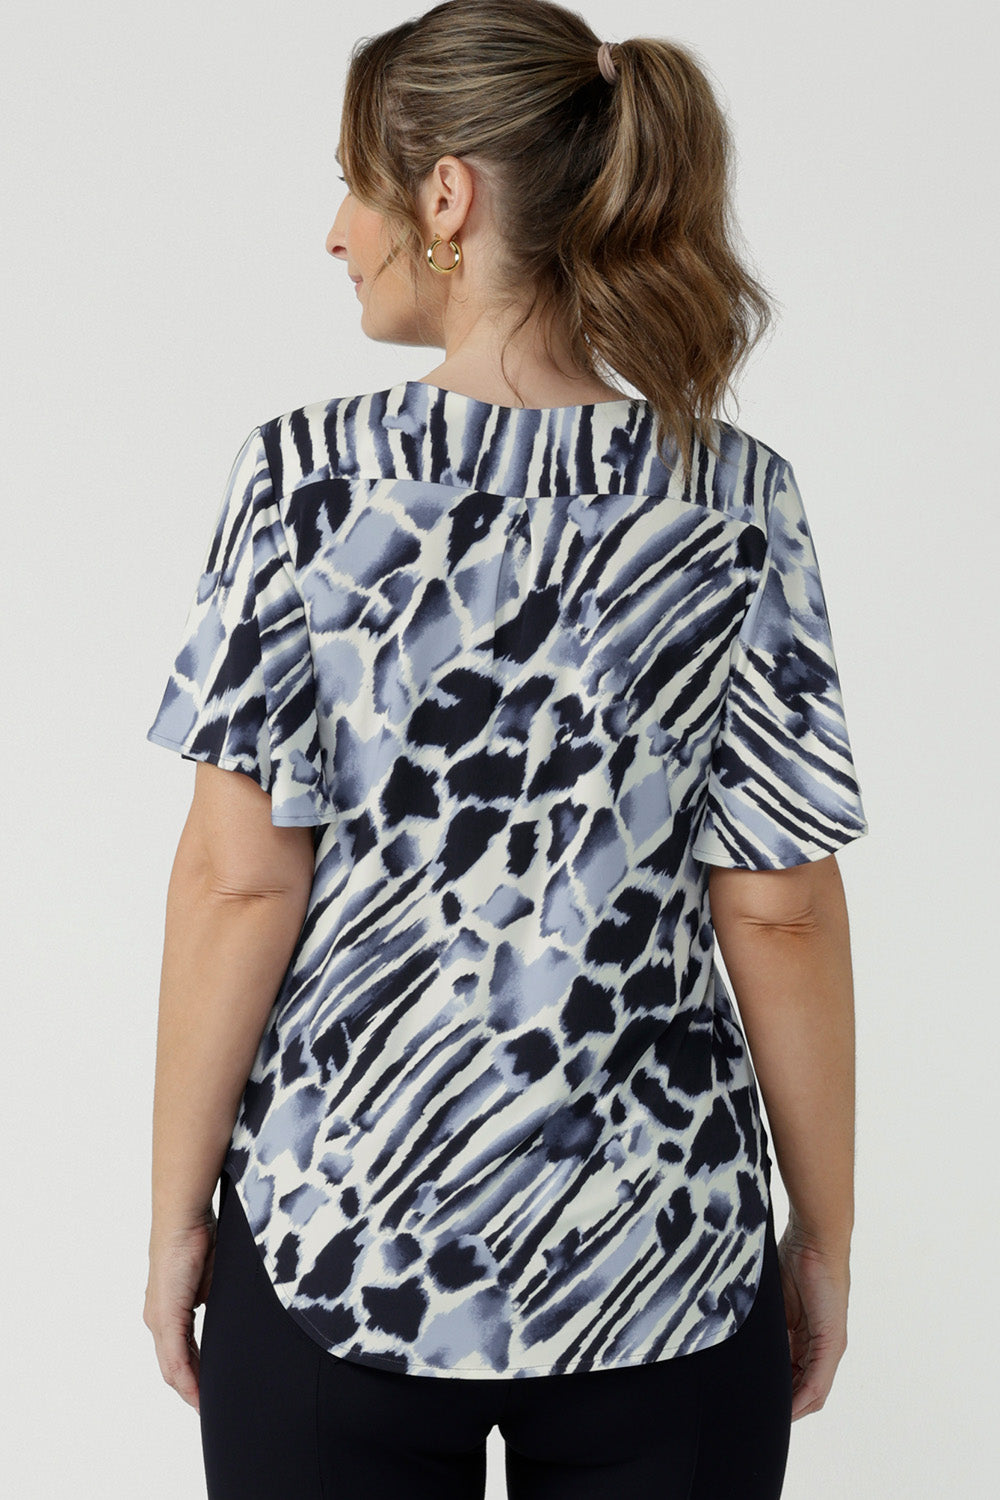 Back view of a size 10, 40 plus woman wearing a blue and white print jersey, V-neck top with flutter sleeves. A good top for summer casual wear or as a workwear top, this Australian-made top is easy to wear and easy care. Shop made in Australia tops in petite to plus sizes online at Australian fashion brand, Leina & Fleur.